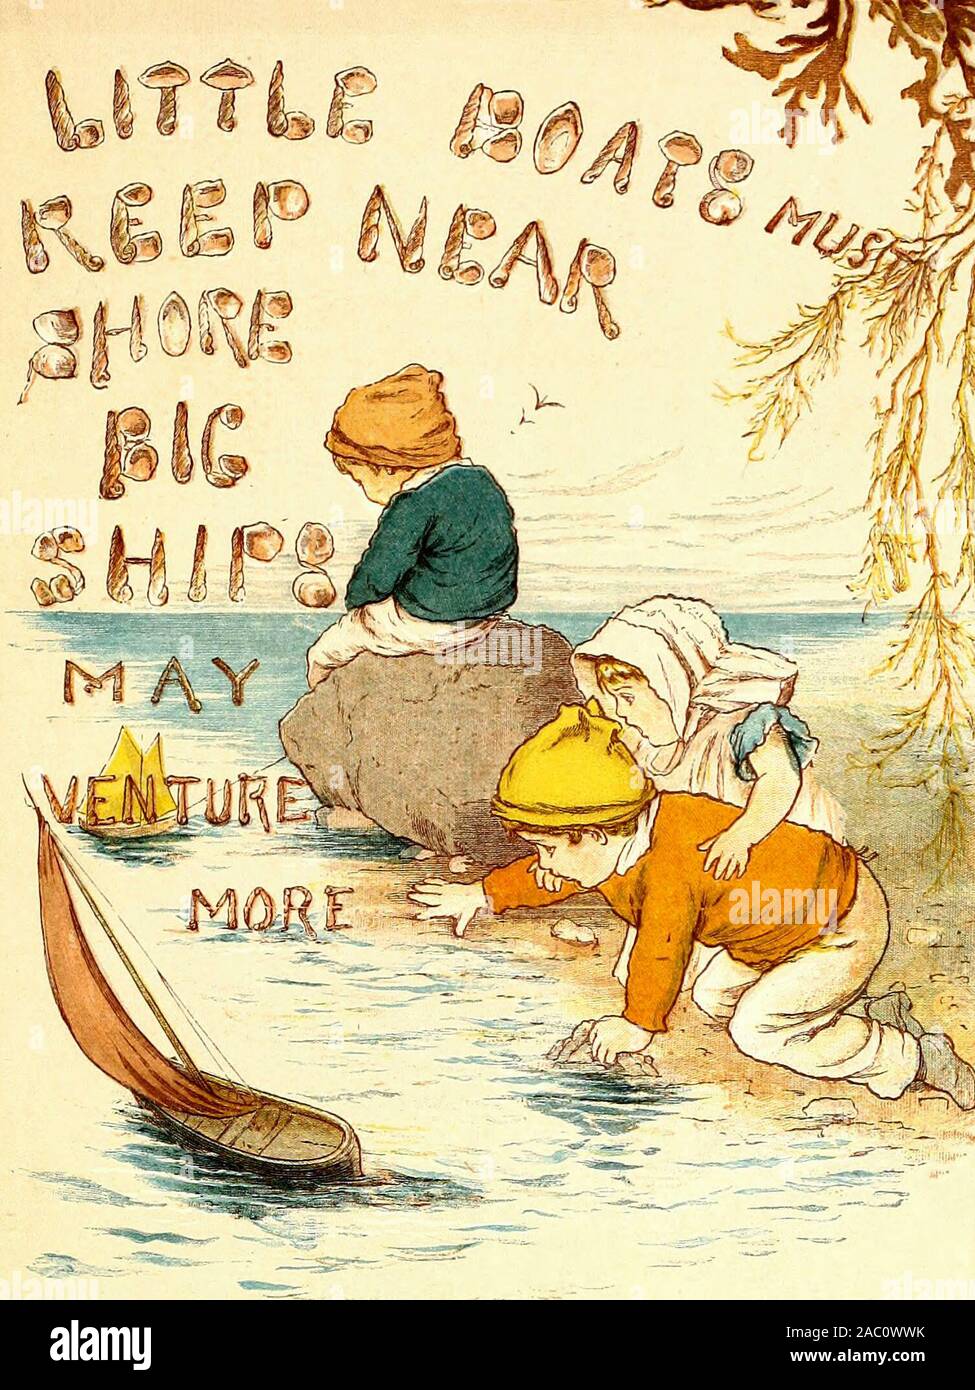 Little boats must keep near shore, Big ships may venture more - A vintage illustration of an old proverb Stock Photo